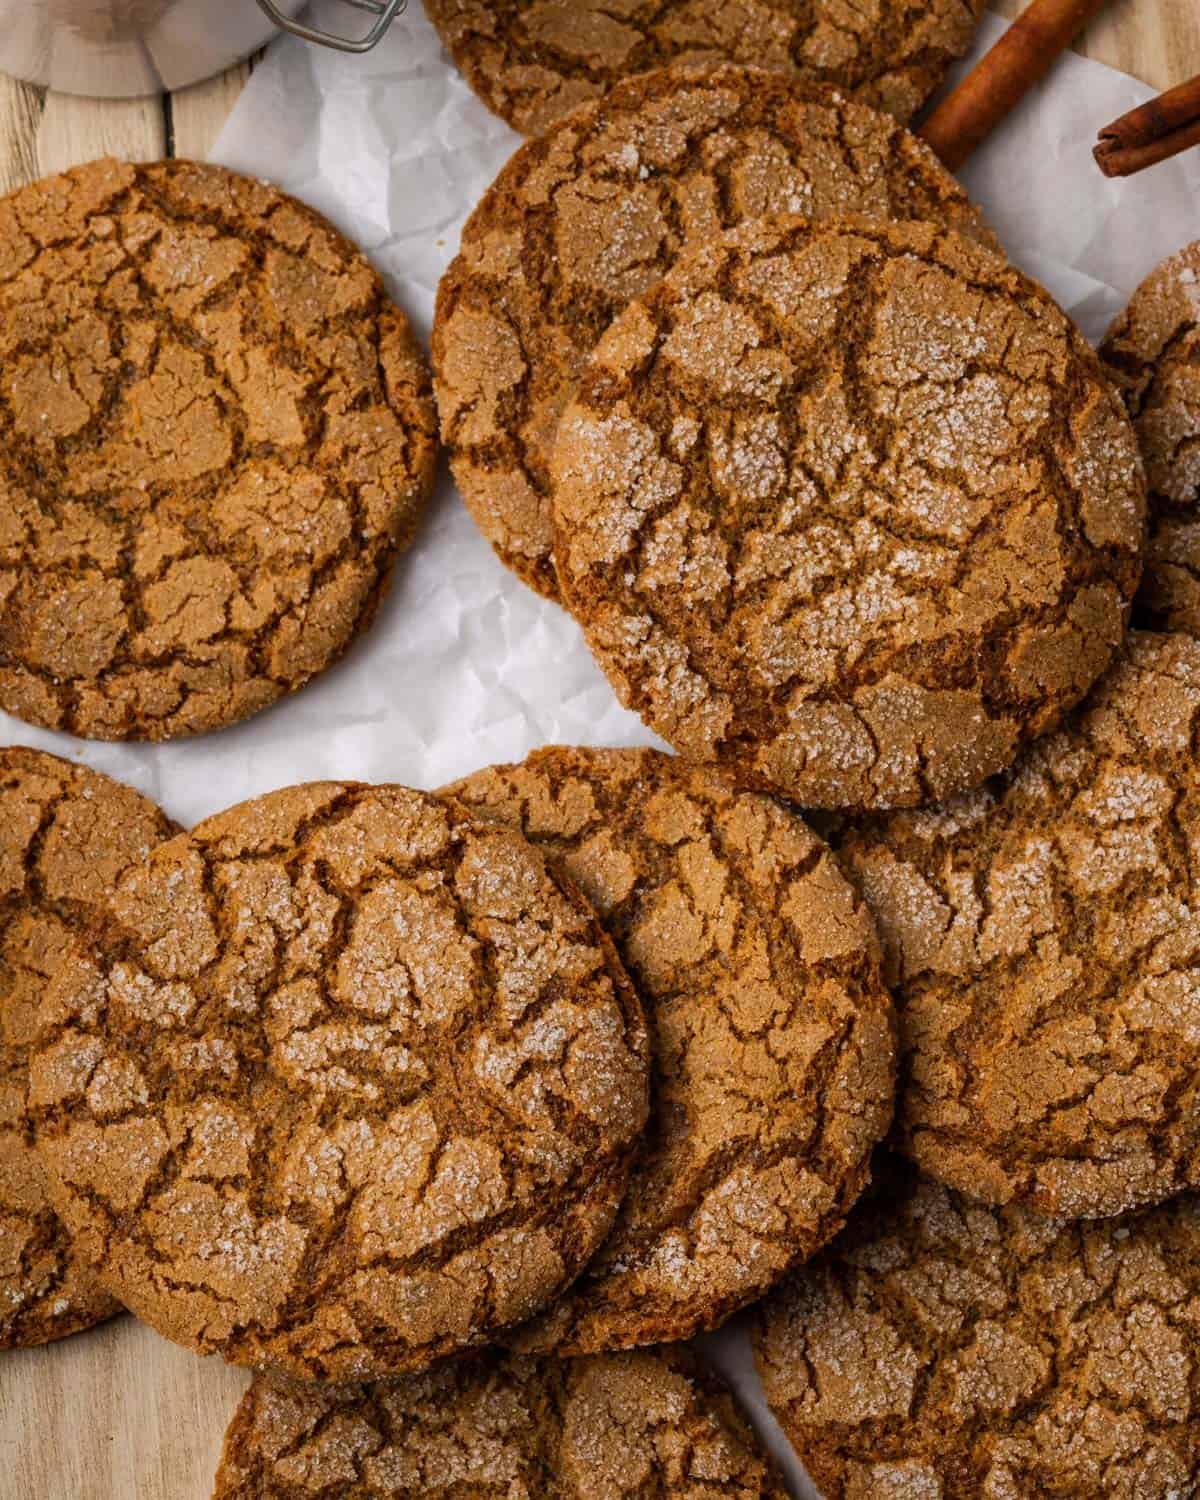 A batch of gluten free molasses cookies spread out on a wood tabletop.